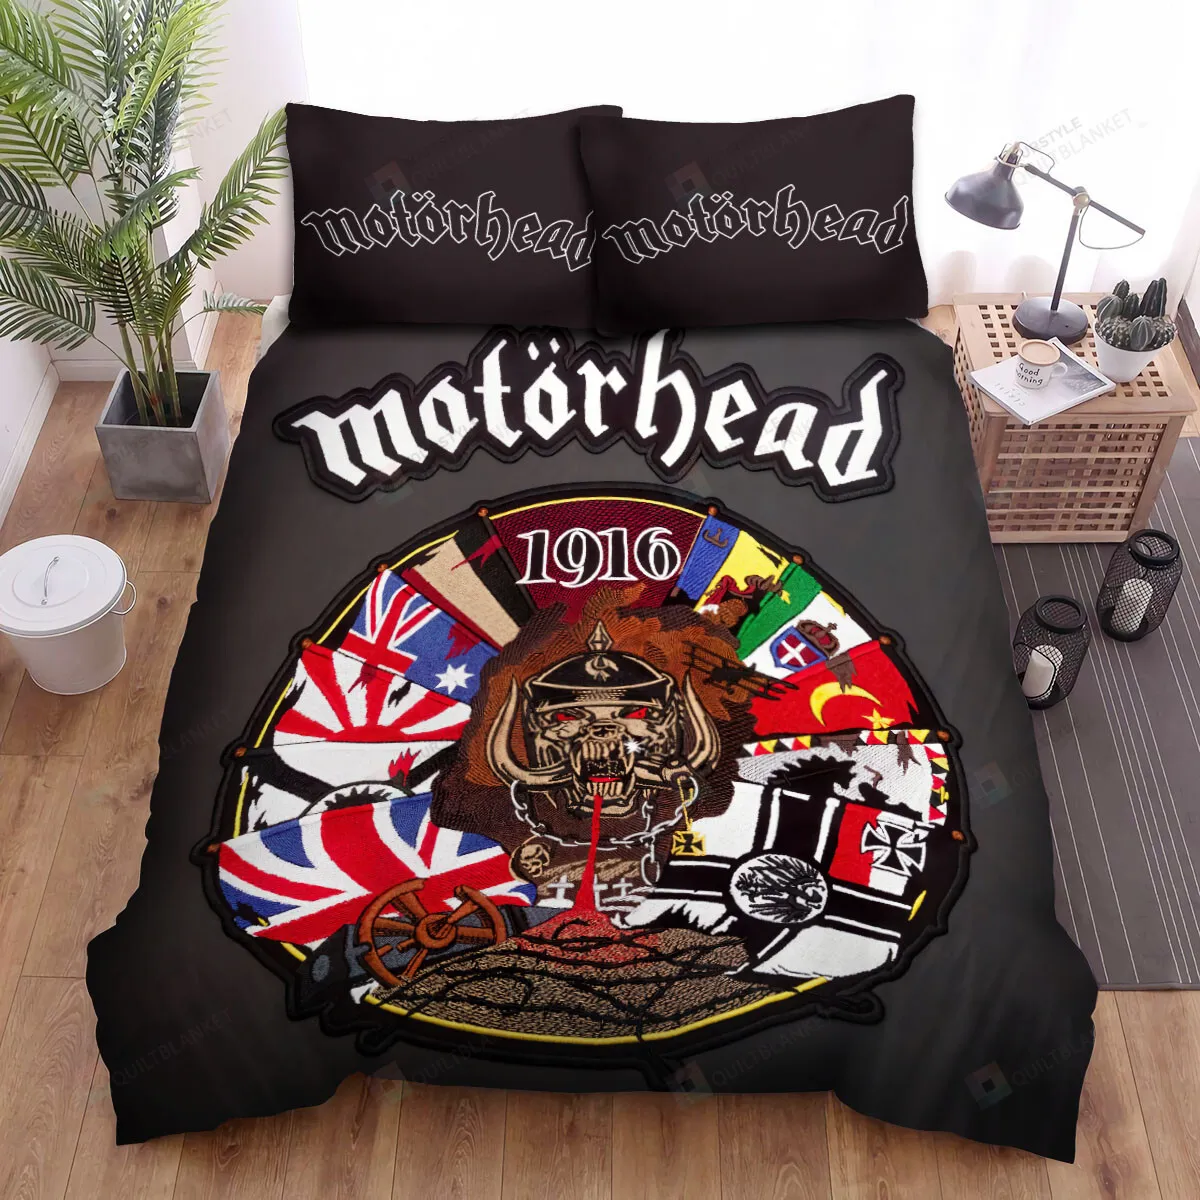 1916 Born To Lose, Live To Win Motorhead Bed Sheets Spread Comforter Duvet Cover Bedding Sets